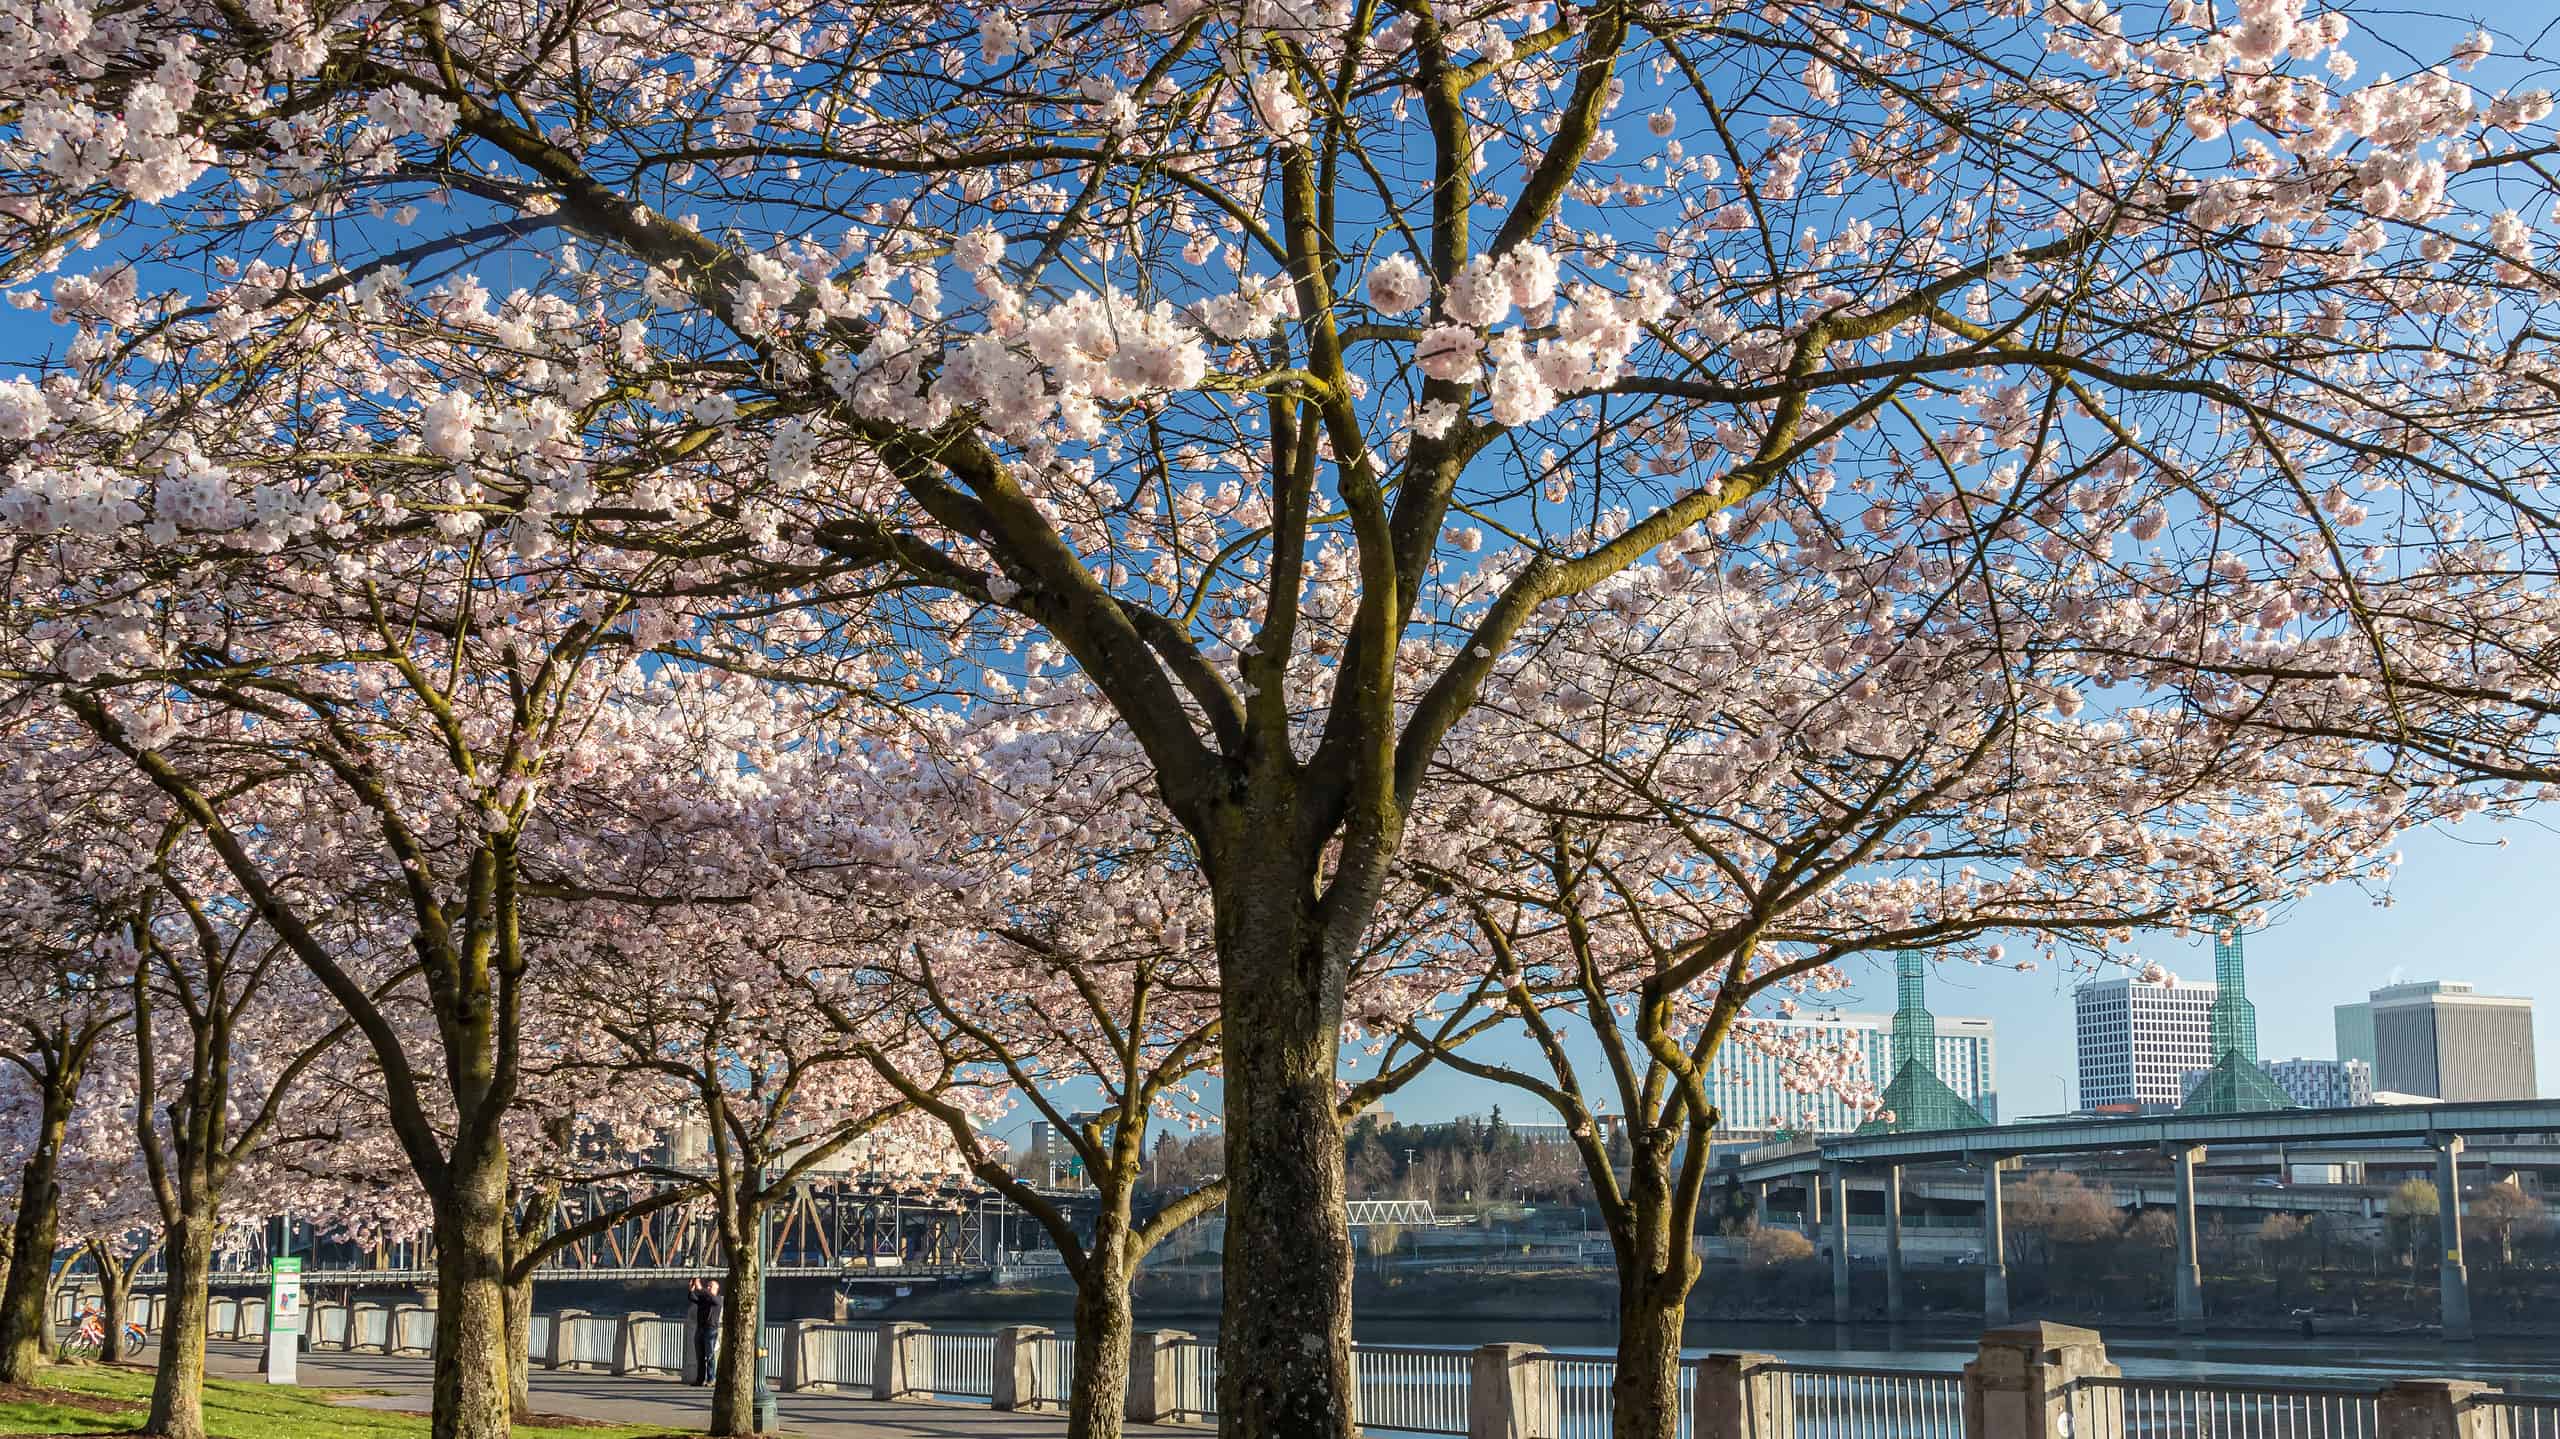 <p>Since 1990, Portland has had a beautiful display of cherry blossoms each spring. Although you can find cherry blossom trees dotted across the city, the best location to view them is in the downtown Tom McCall Waterfront Park in the Japanese American Historical Plaza. They typically bloom starting in mid-March to April.</p><p>Sharks, lions, alligators, and more! Don’t miss today’s latest and most exciting animal news. <strong><a href="https://www.msn.com/en-us/channel/source/AZ%20Animals%20US/sr-vid-7etr9q8xun6k6508c3nufaum0de3dqktiq6h27ddeagnfug30wka">Click here to access the A-Z Animals profile page</a> and be sure to hit the <em>Follow</em> button here or at the top of this article!</strong></p> <p>Have feedback? Add a comment below!</p>